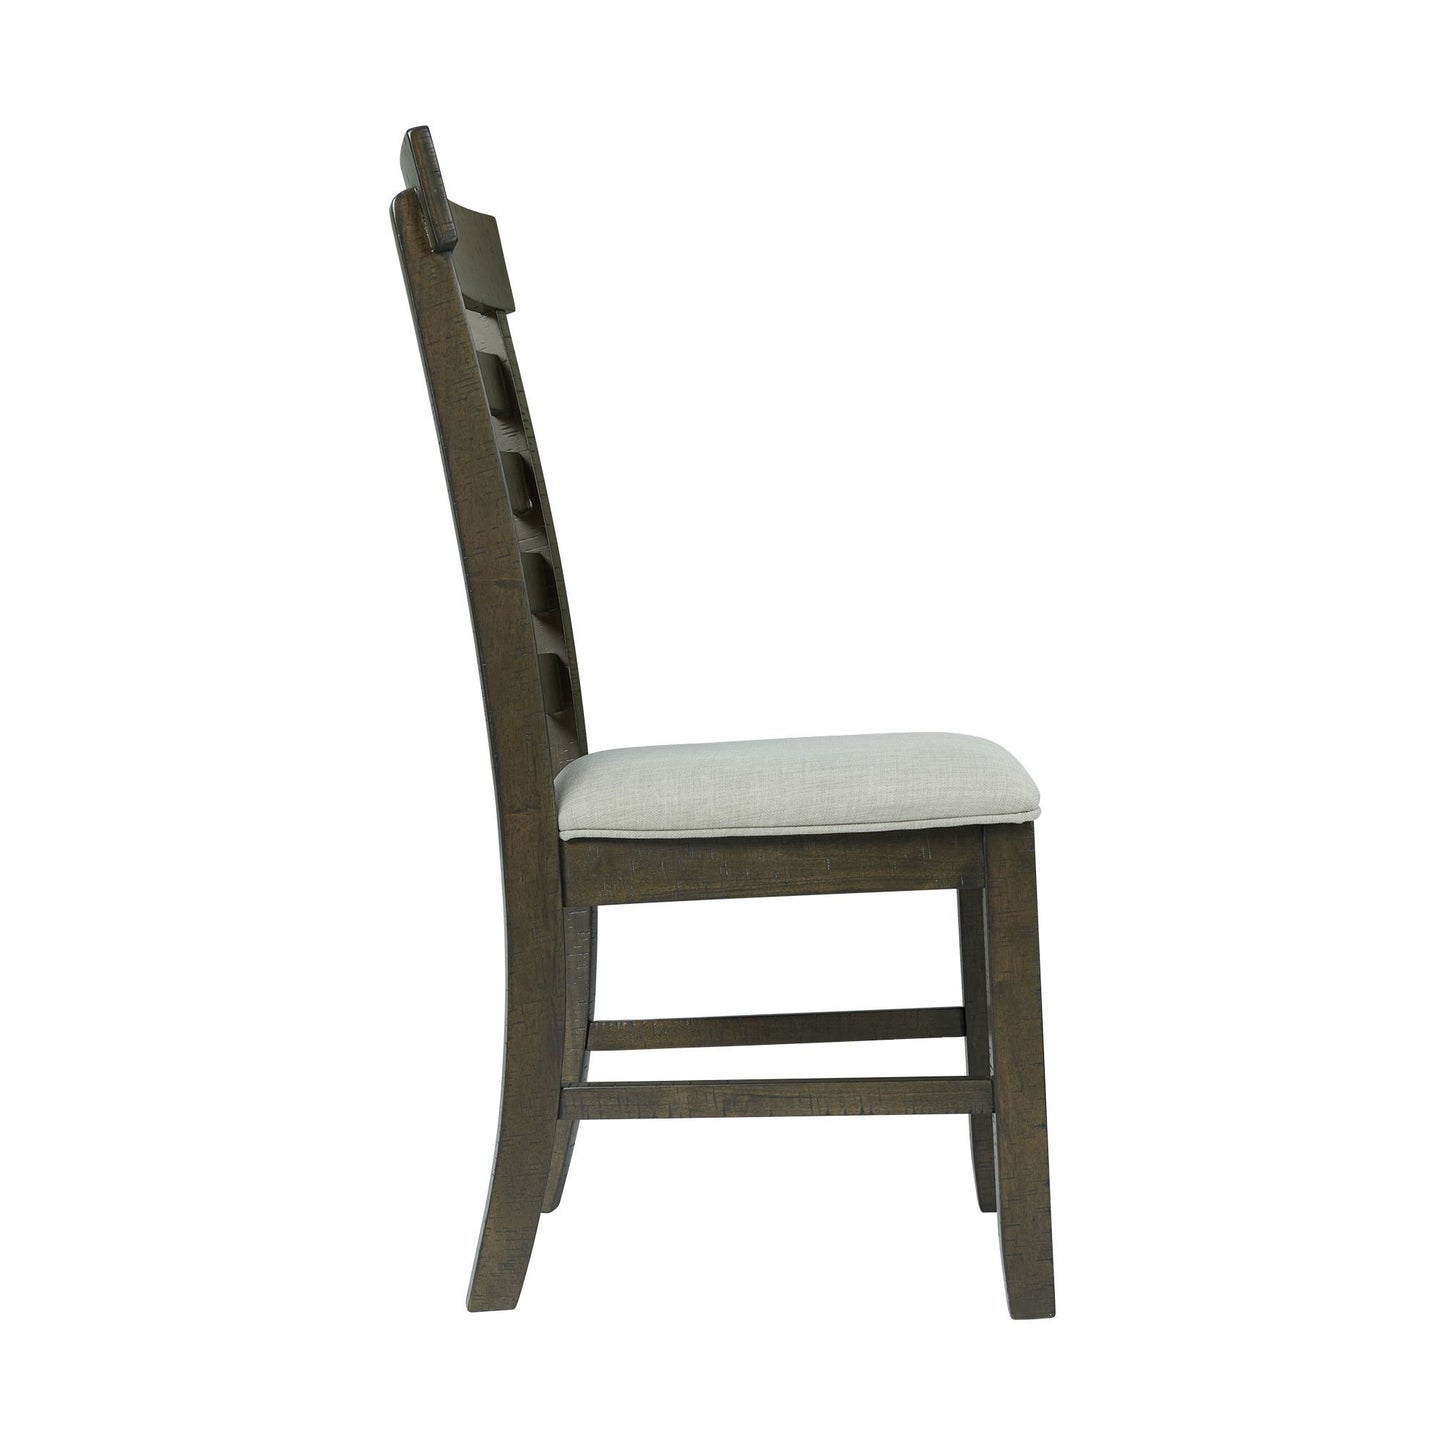 Colorado - Dining Height Side Chair (Set of 2) - Charcoal